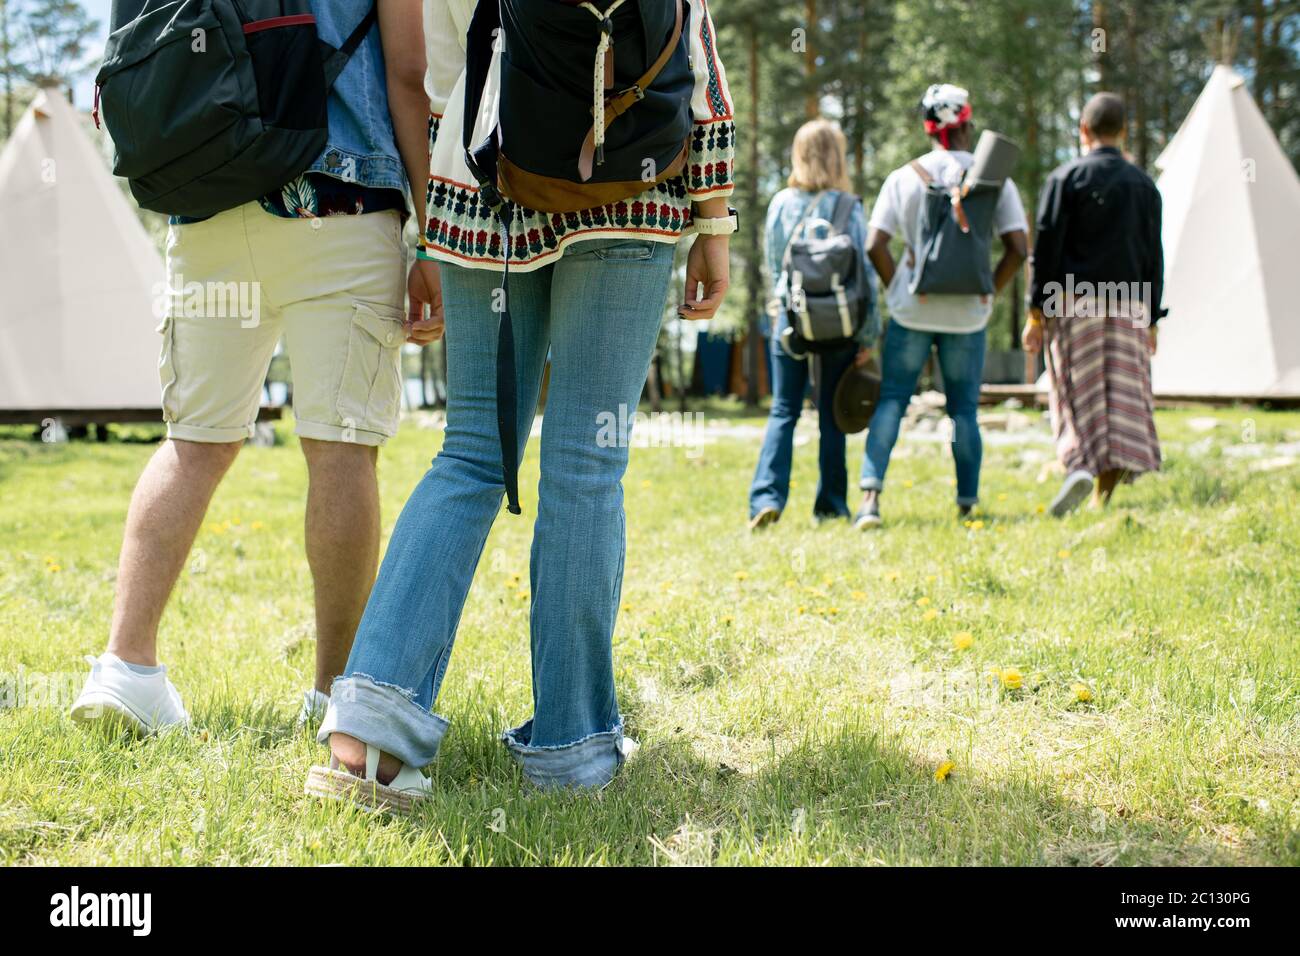 Close-up of people with satchels standing on grass and choosing tents at festival campsite Stock Photo